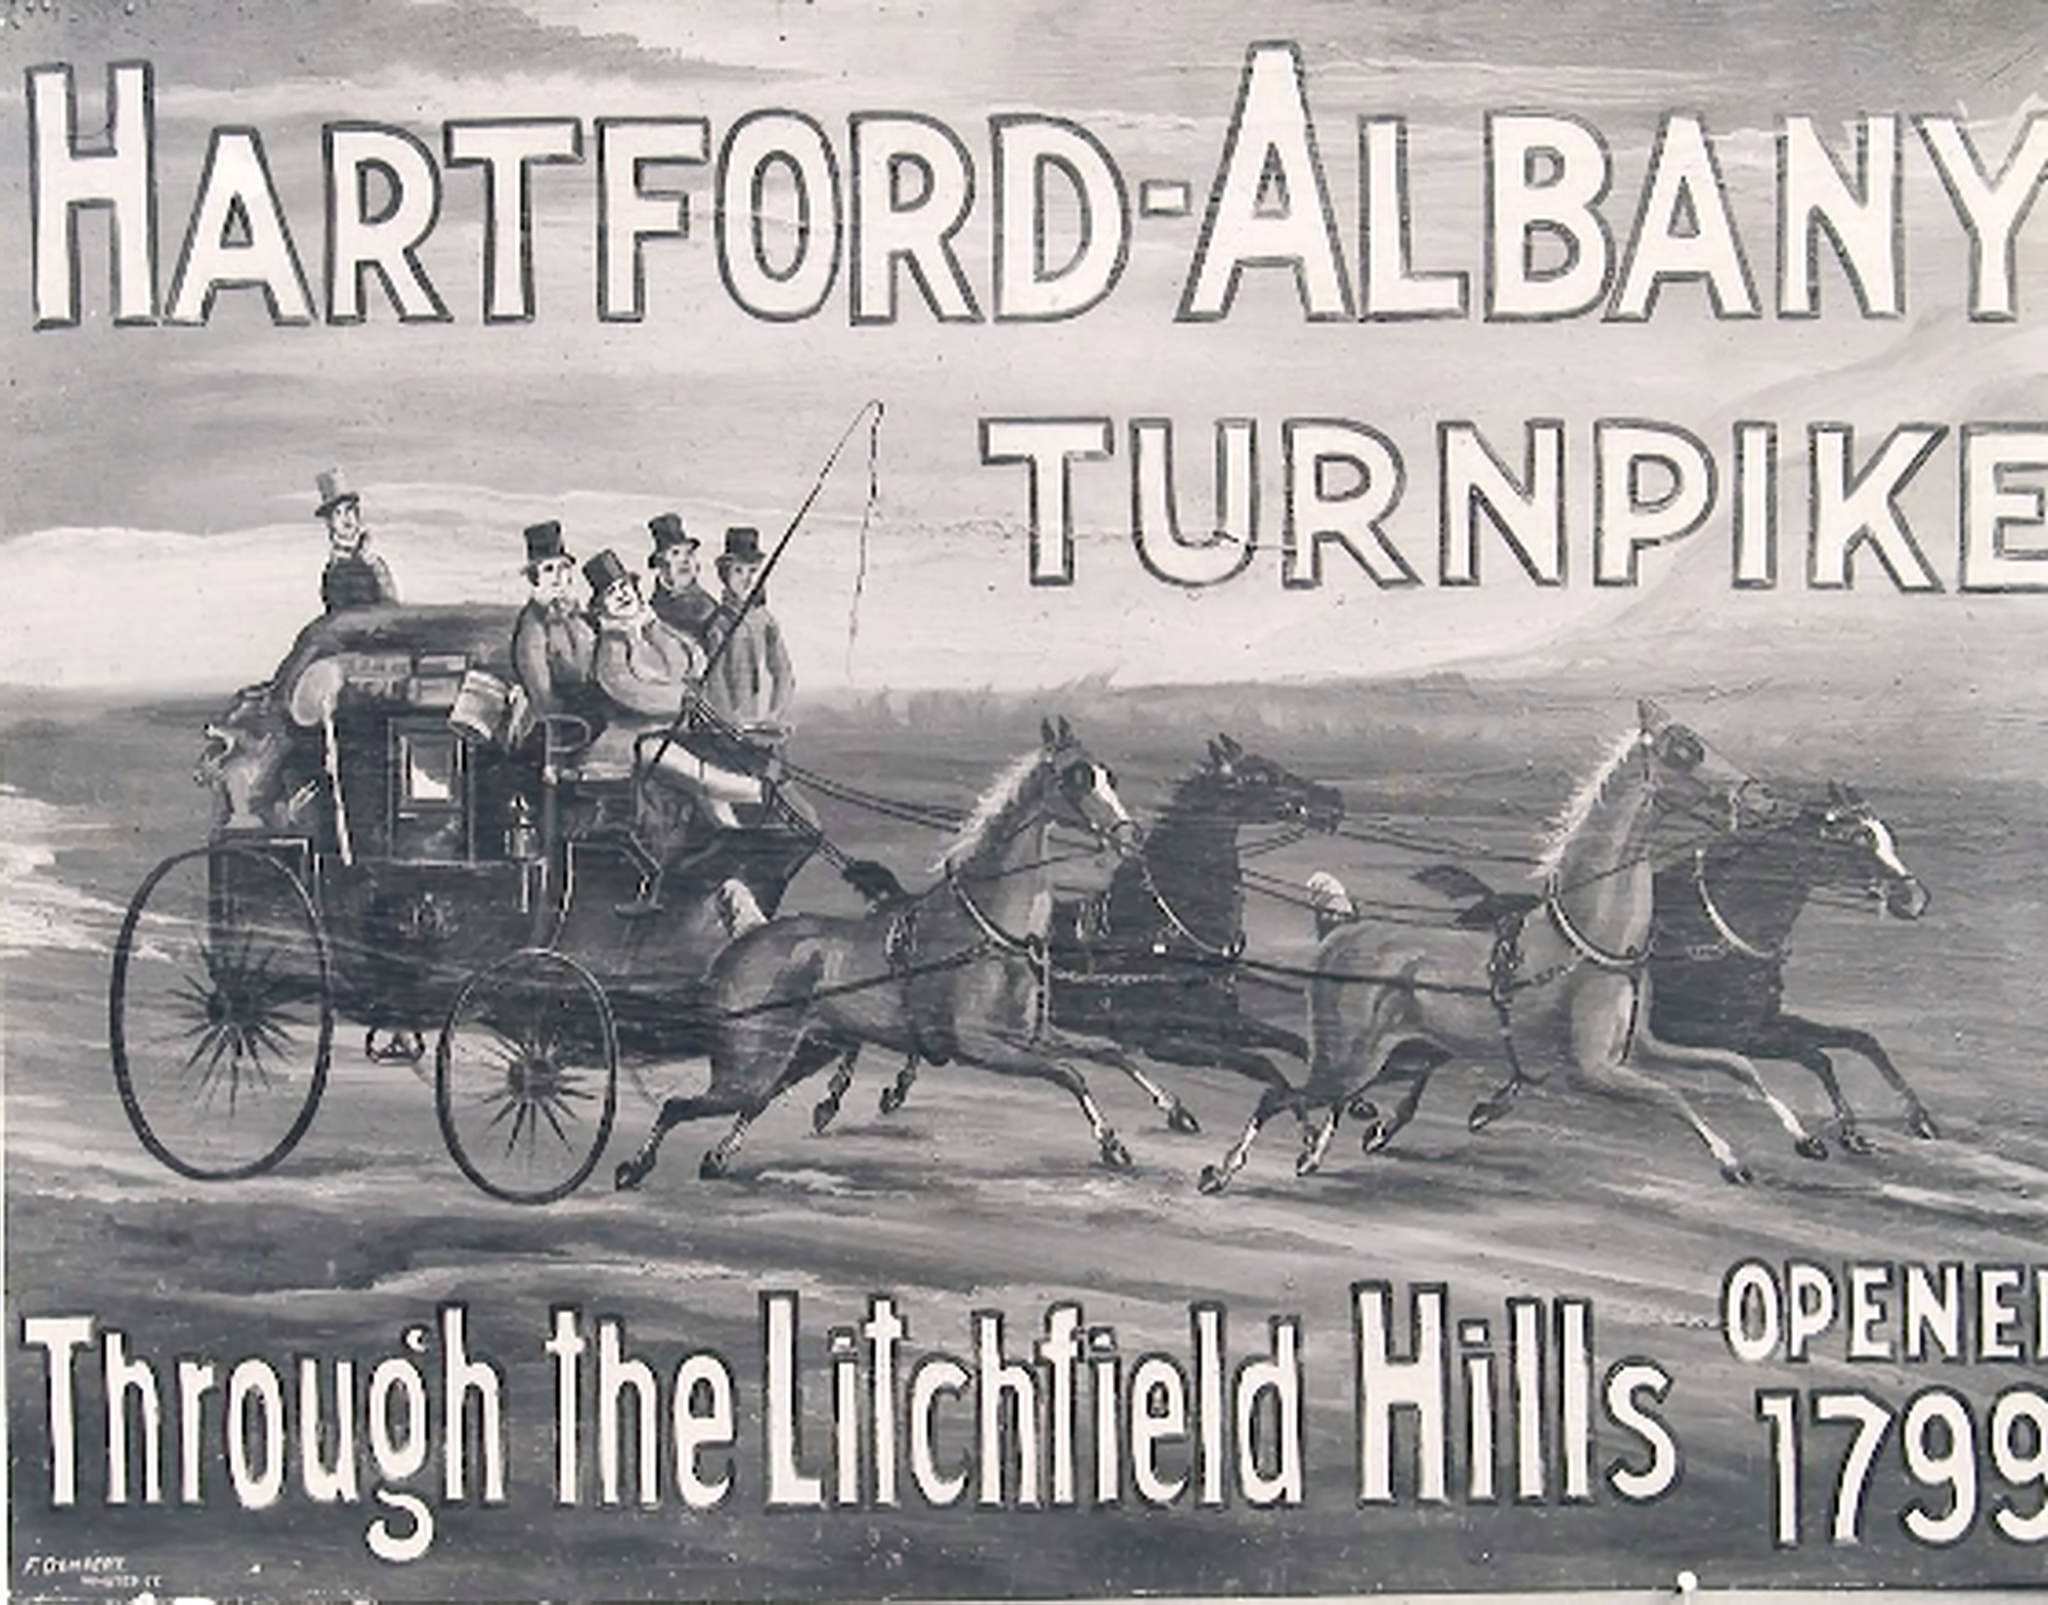 An advertisement for a stagecoach turnpike in 1799.